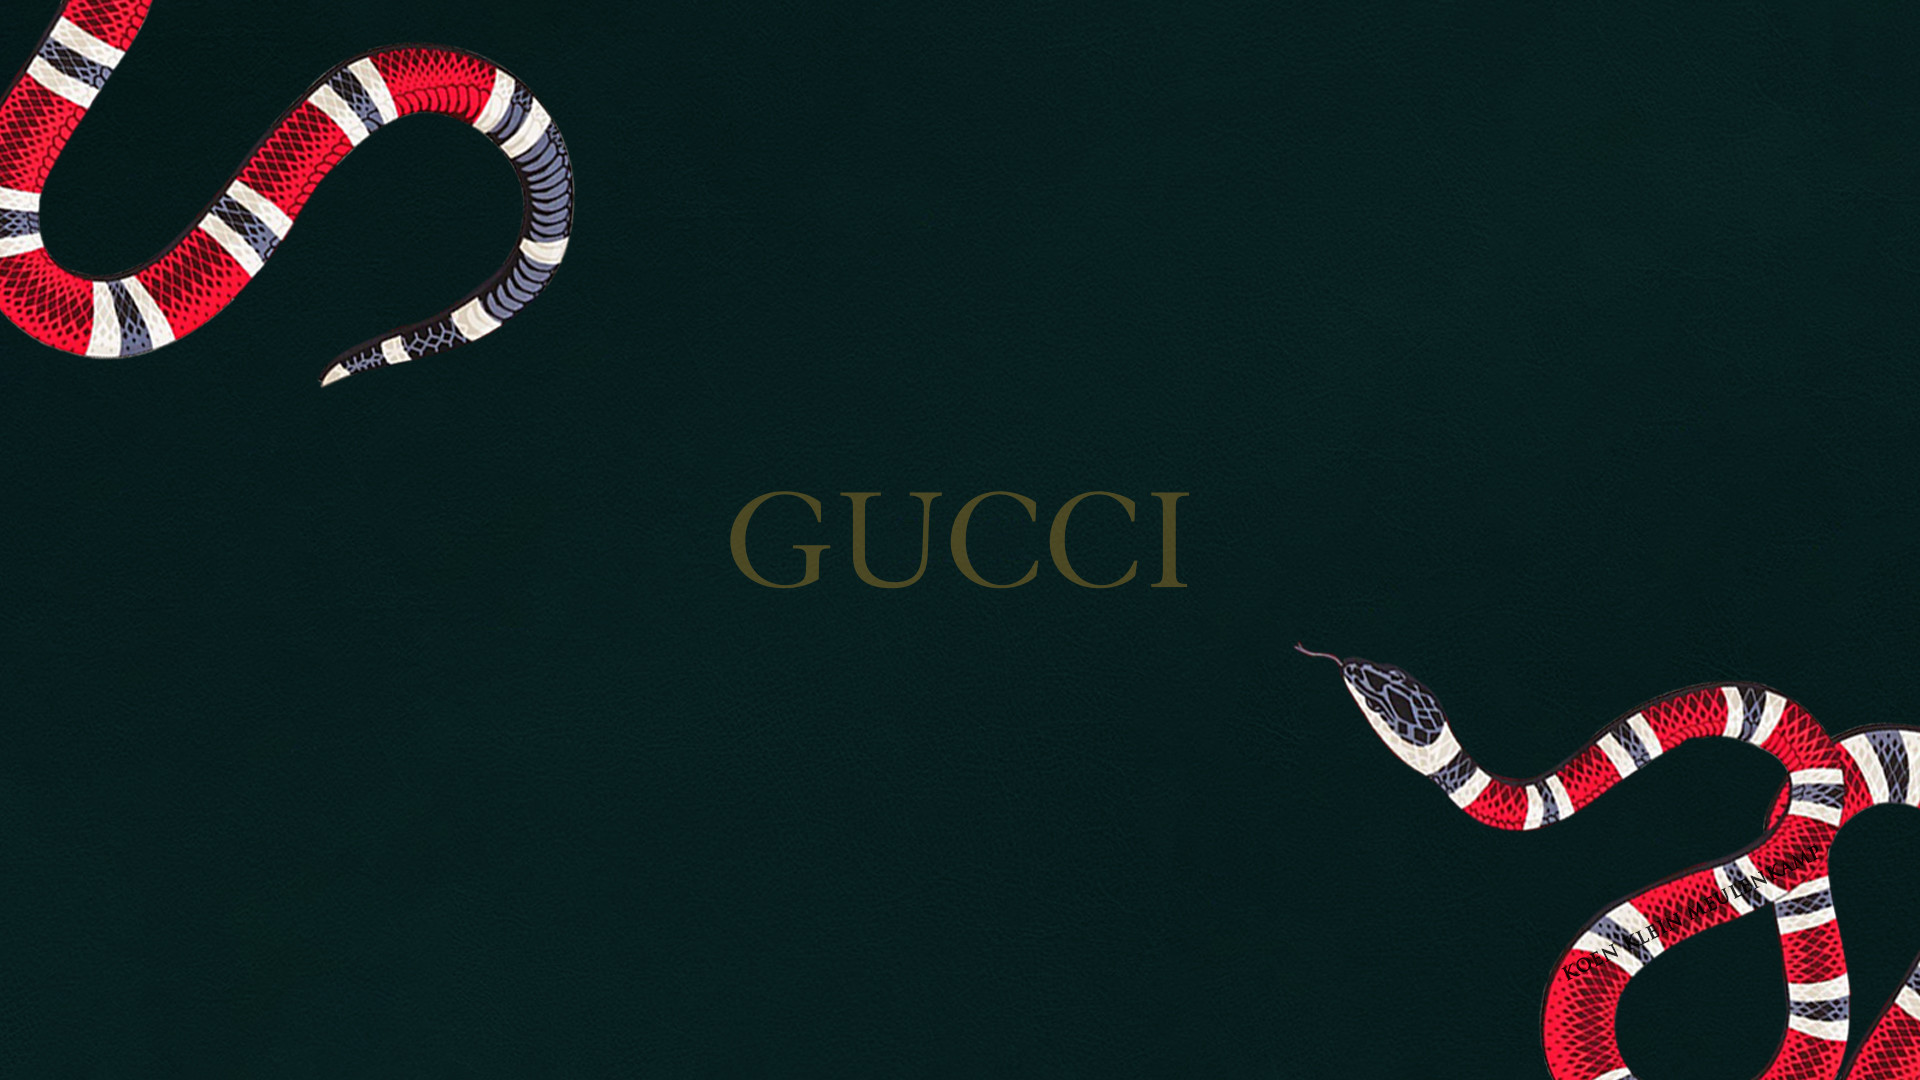 1920x1080 0 1080x1920 Most Gucci Wallpaper Iphone  Gucci Snakes wallpapers +  PSD files by fkkm1999 on DeviantArt